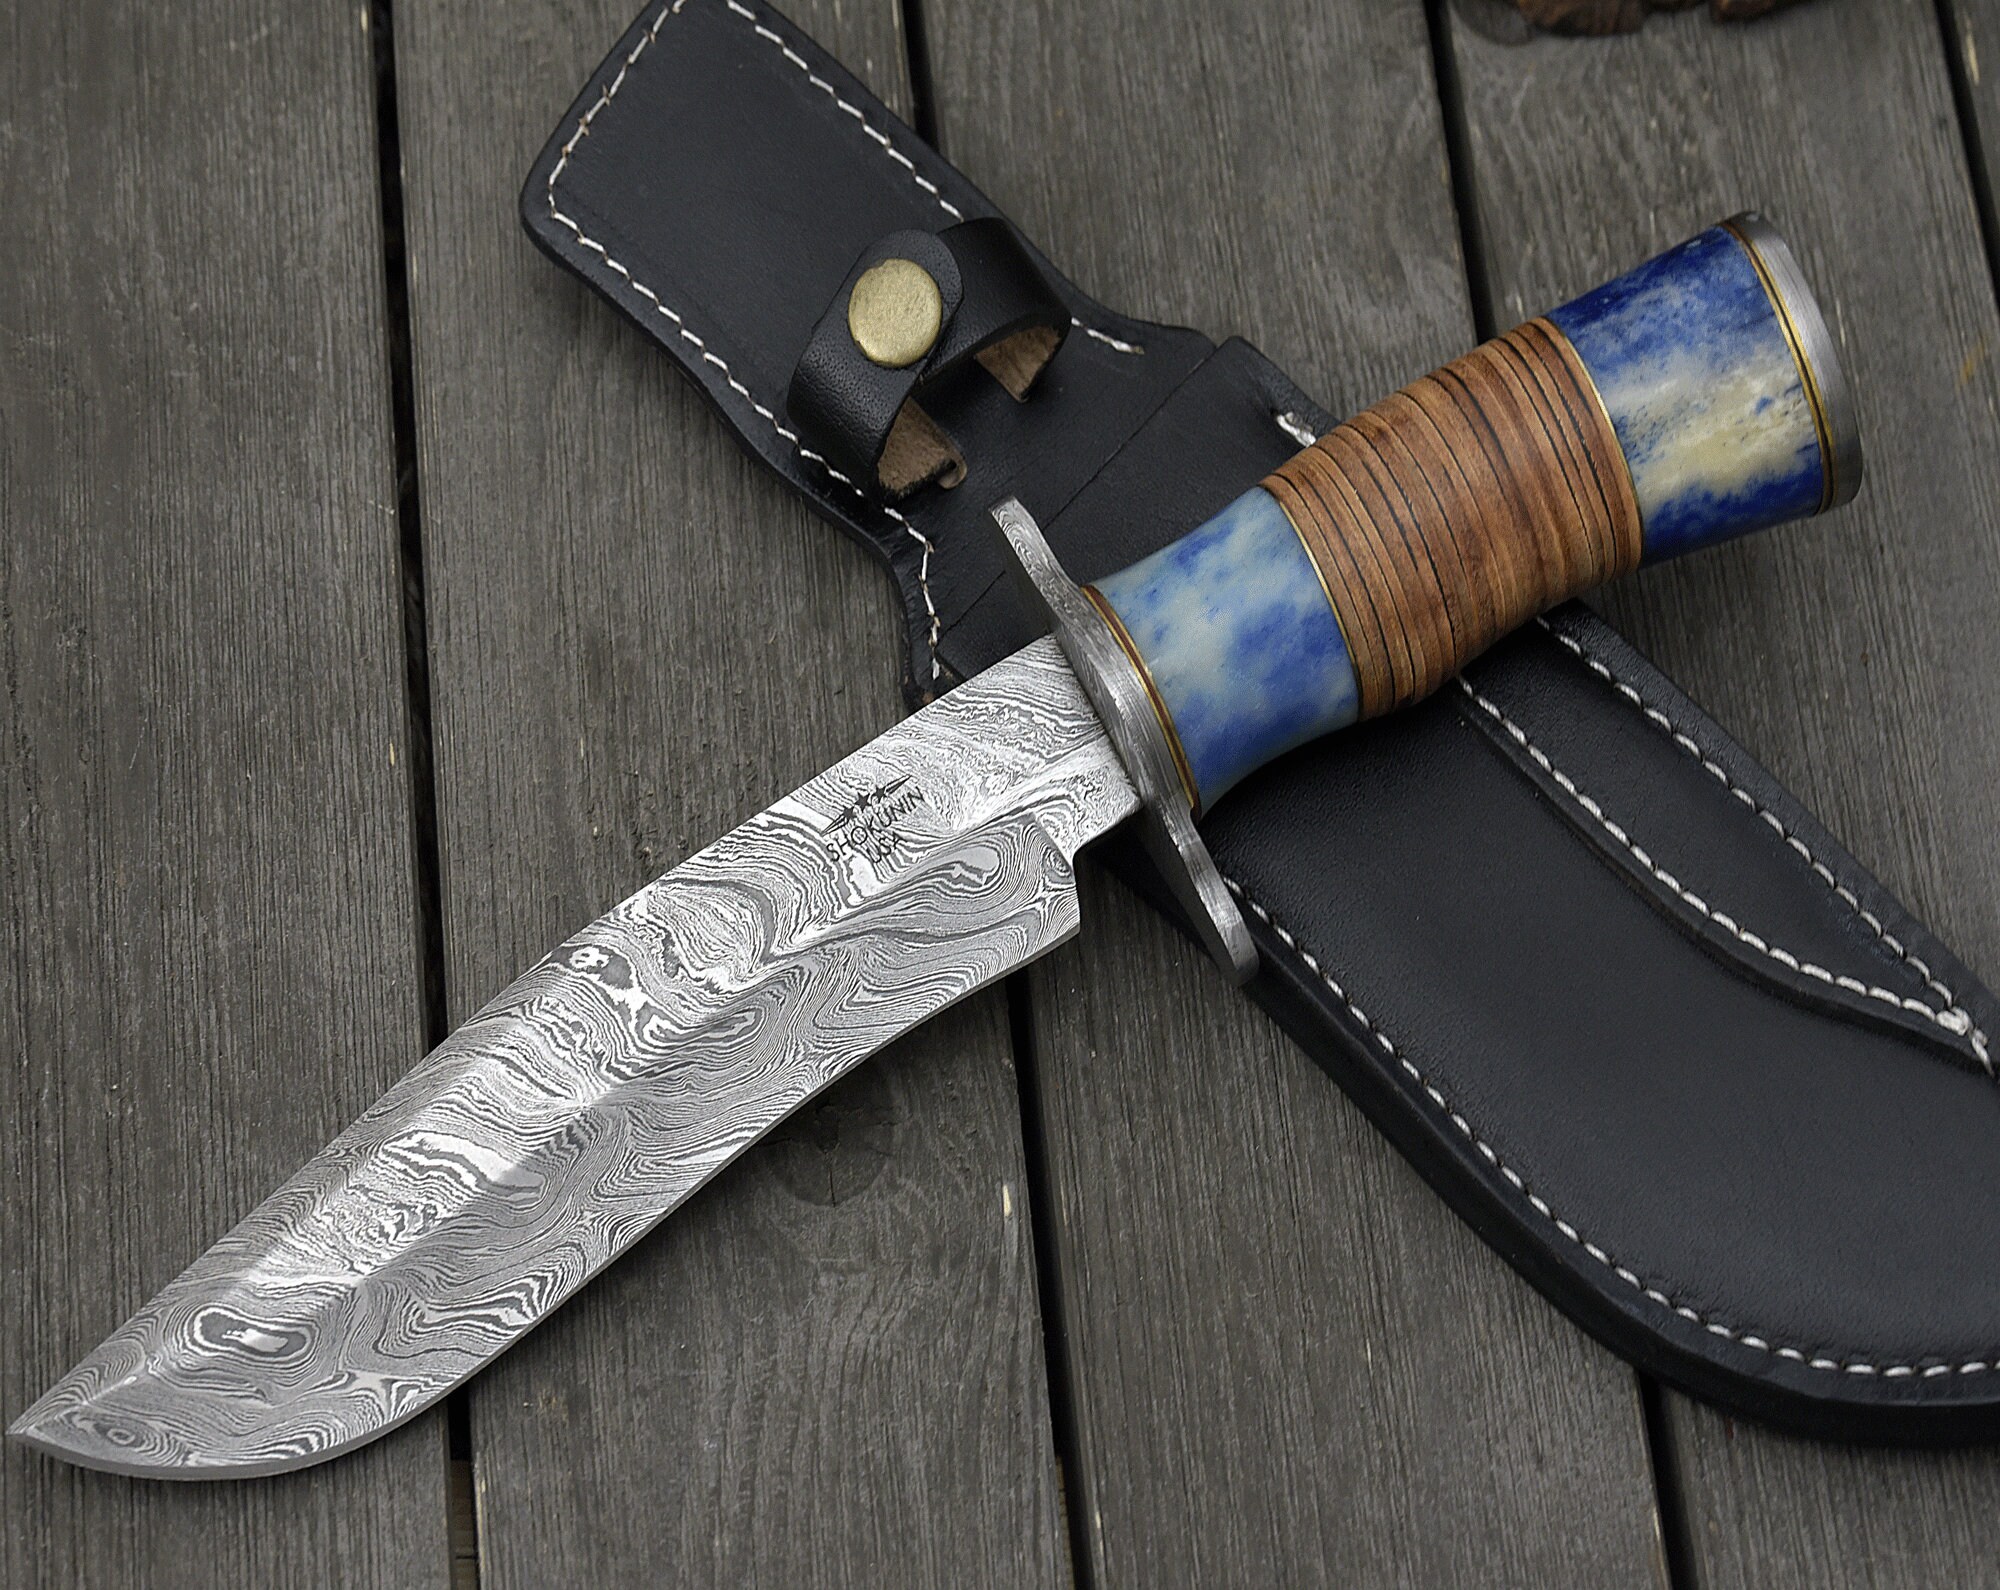 BOWIE KNIFE Custom Damascus Knife 12.0 hand Forged - Etsy